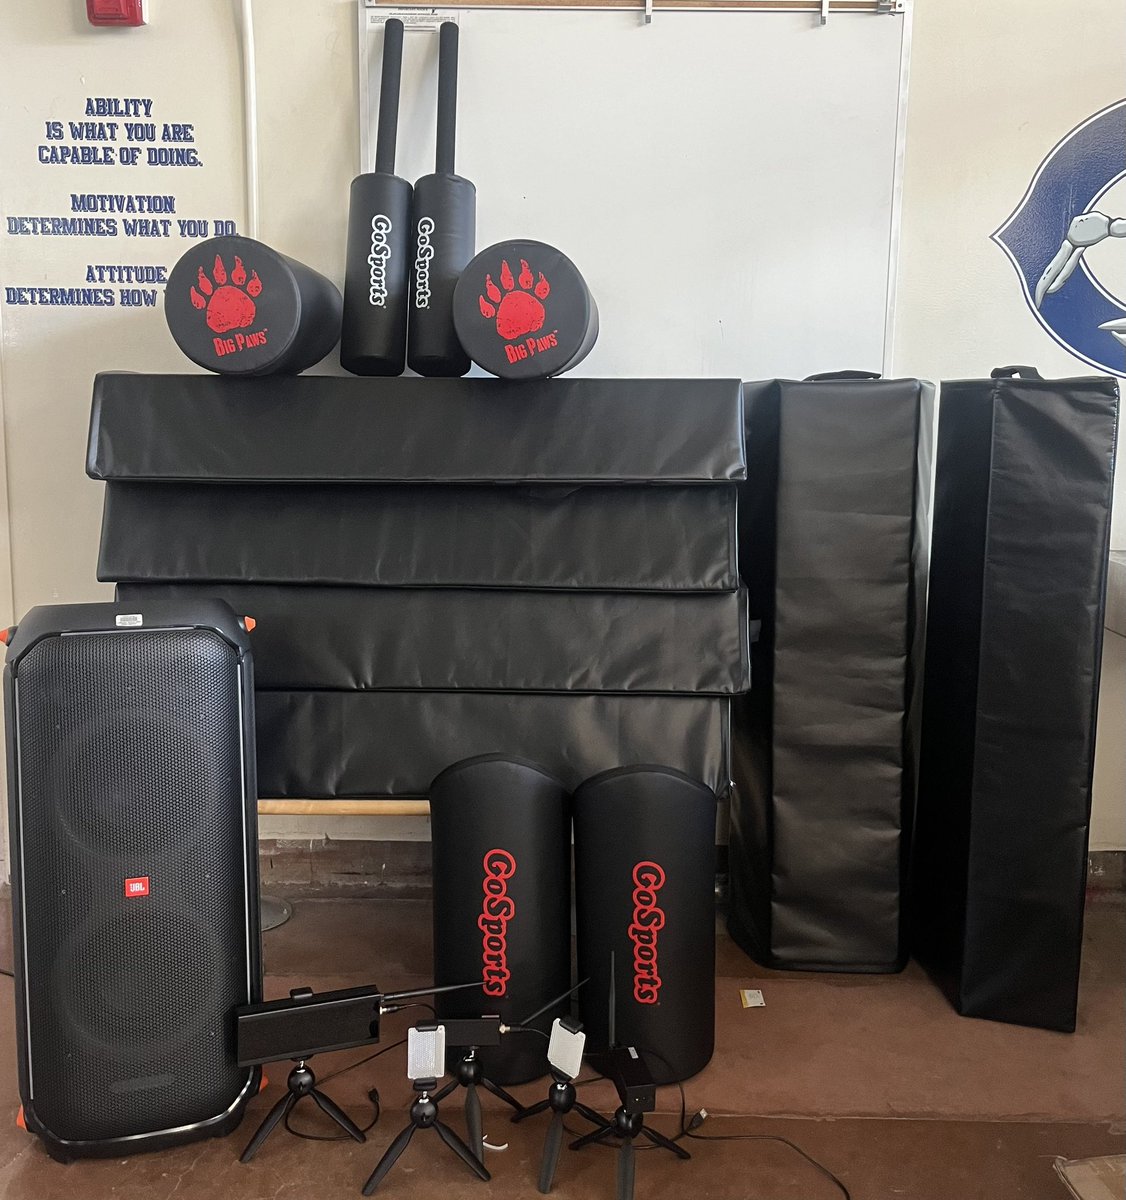 Huge shoutout and appreciation to our Scorpion Athletic Booster Club (@ScorpAthleticBC) for their Legacy VI contribution towards the @ACHS_Scorps_FB program! We were able to acquire some much needed upgrades to our practice equipment! #GoScorps #Character #Commitment #Unity